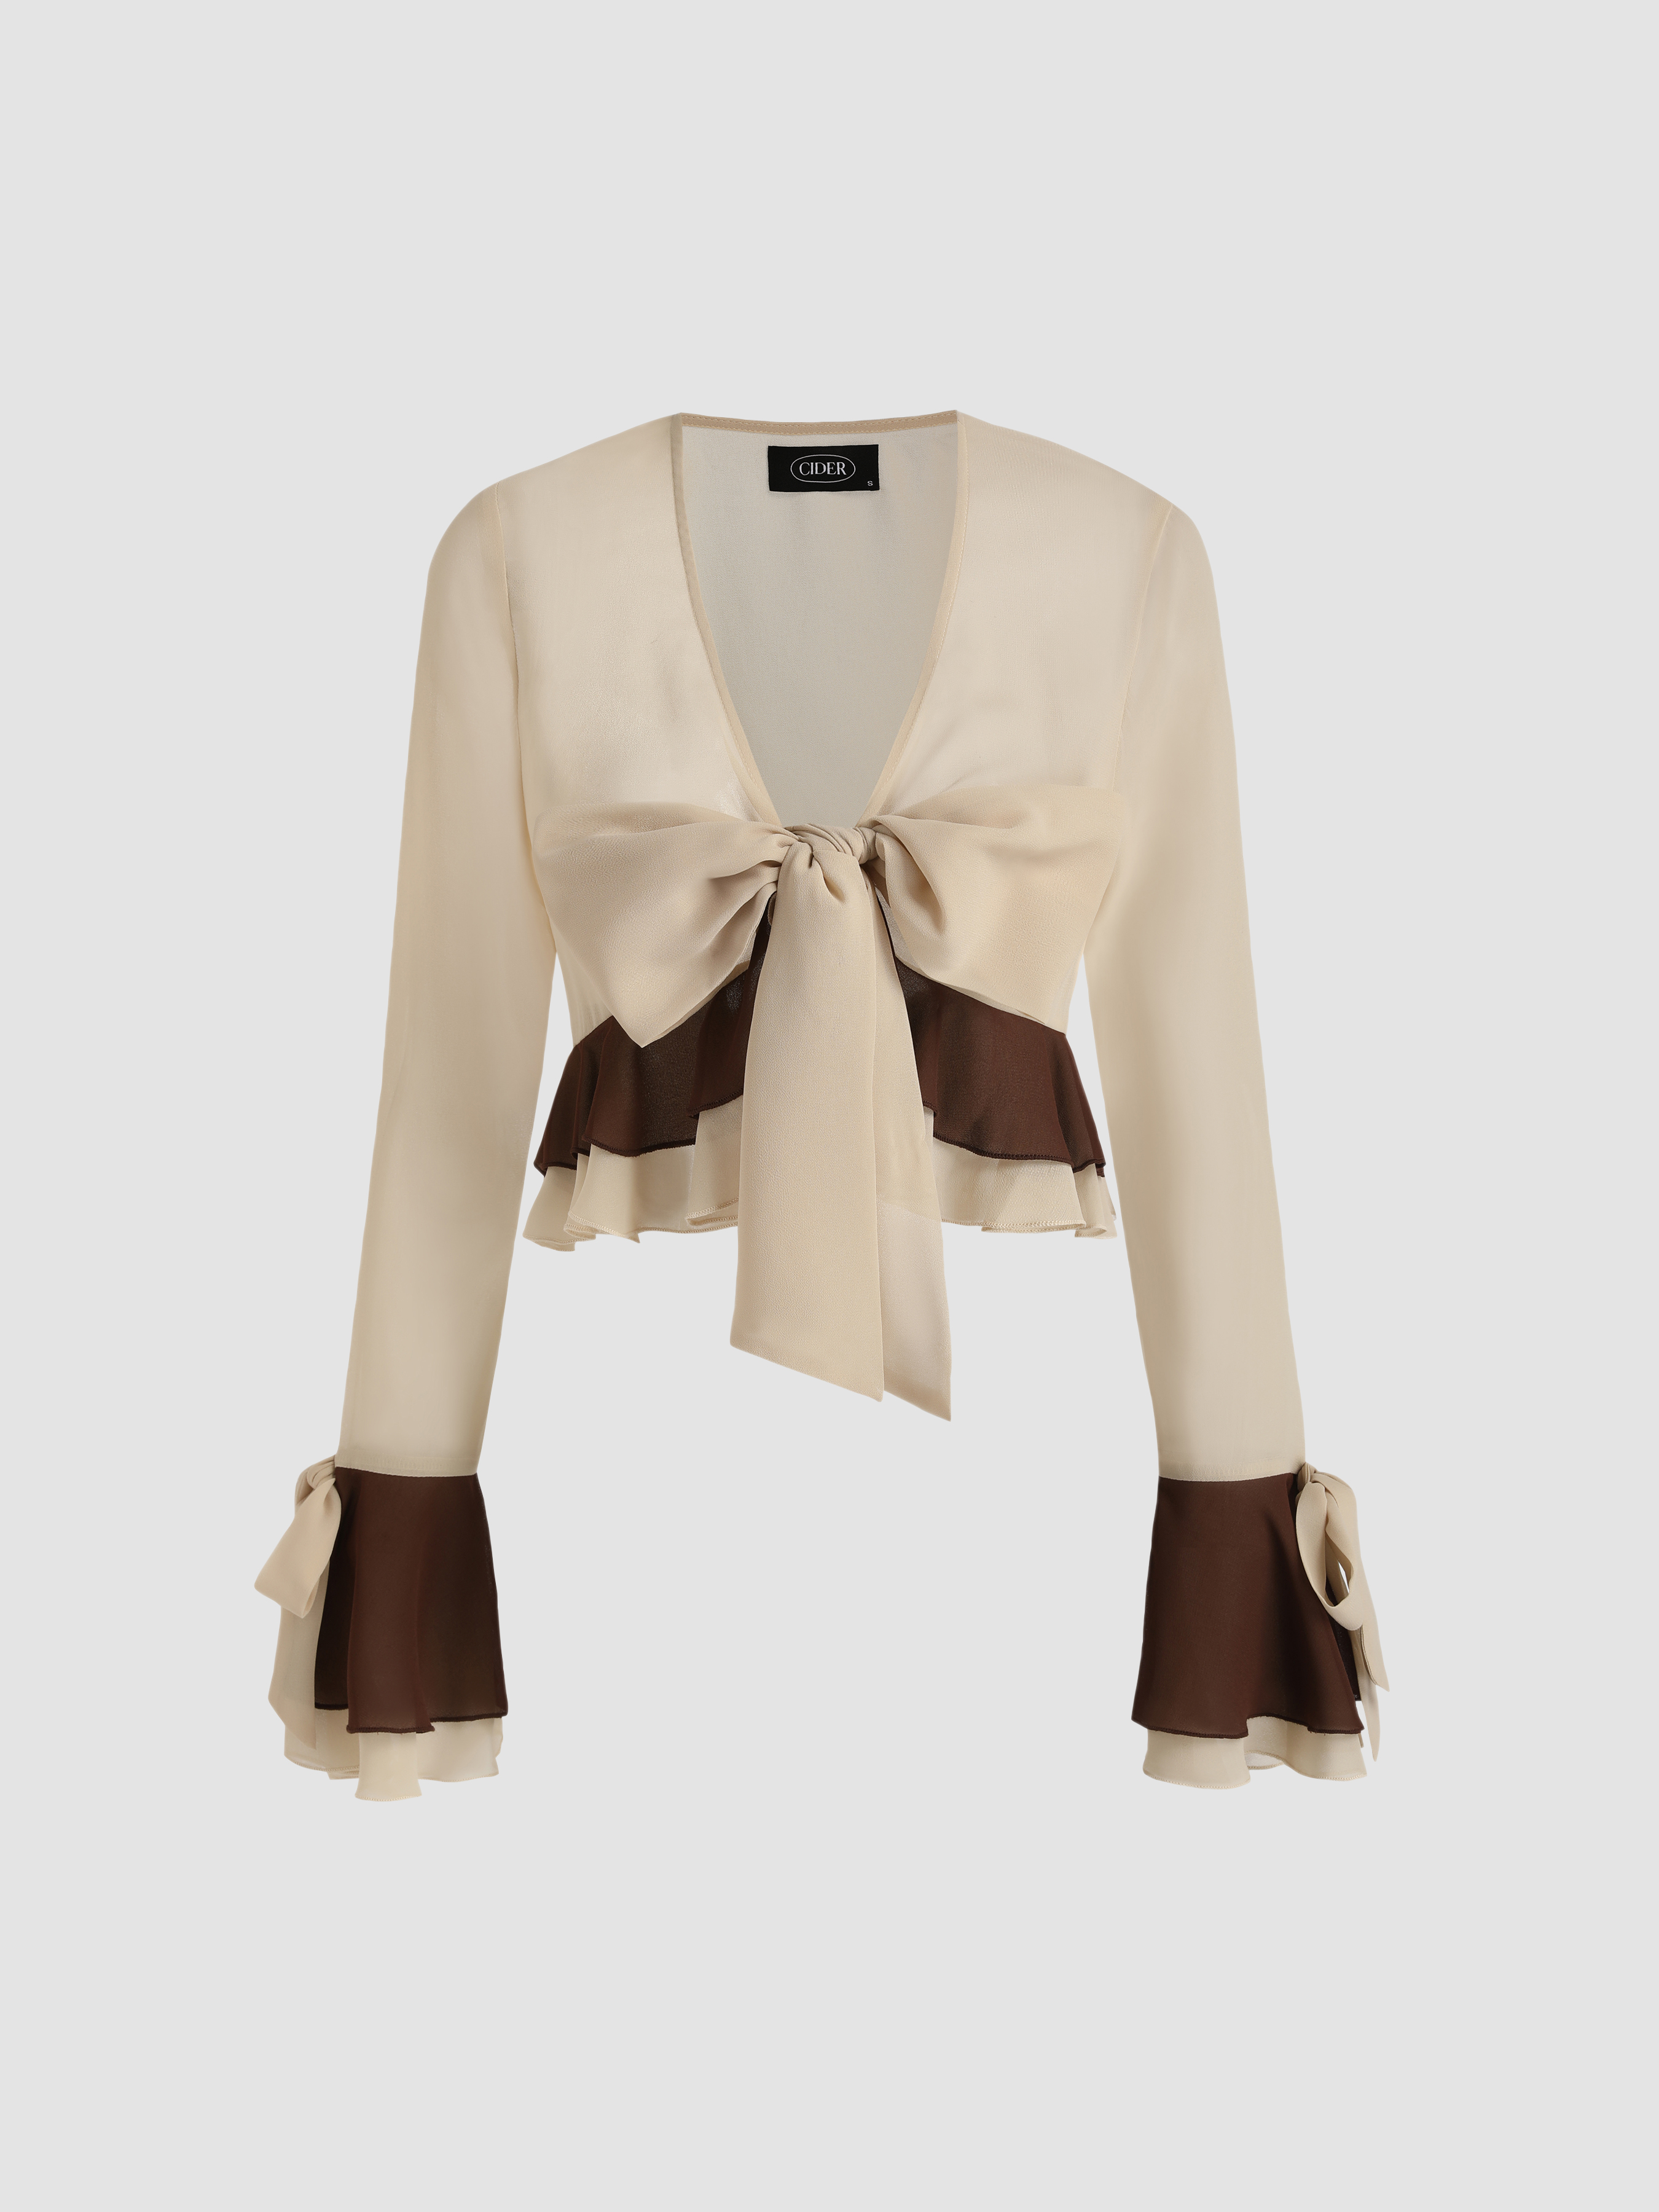 Bowknot Ruffle Crop Blouse - Cider